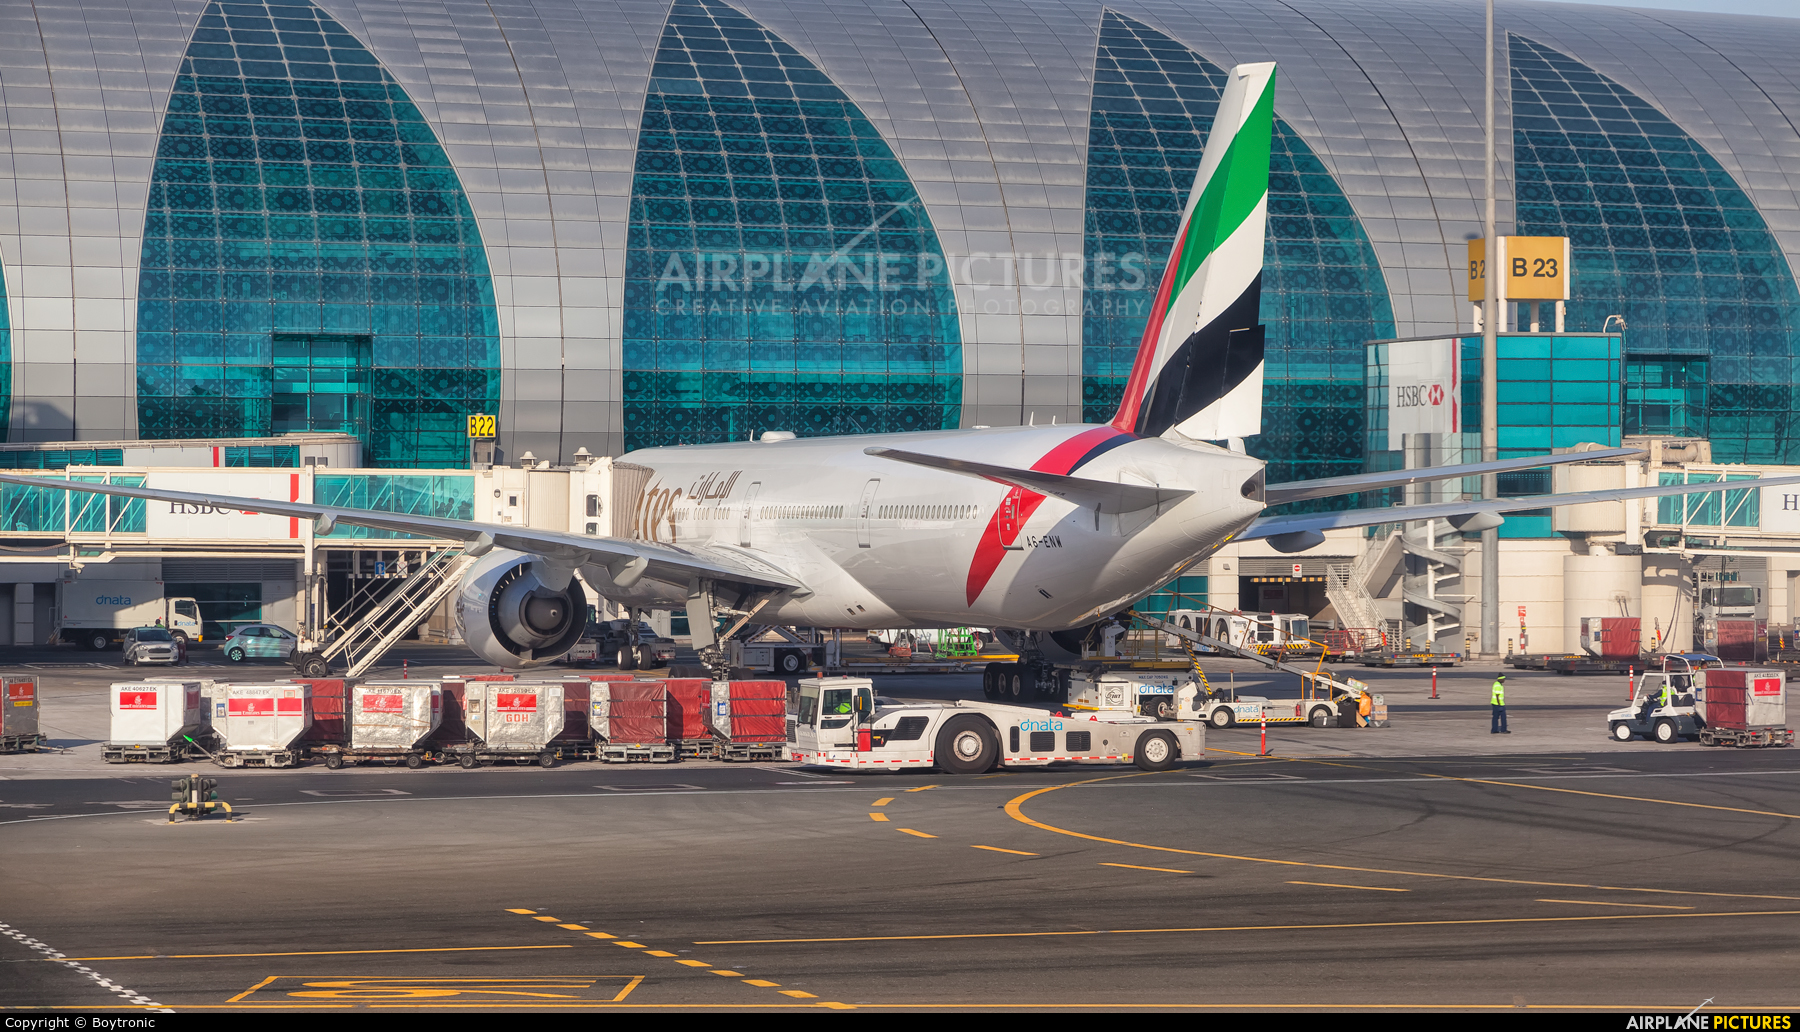 Emirates Airlines A6-ENW aircraft at Dubai Intl